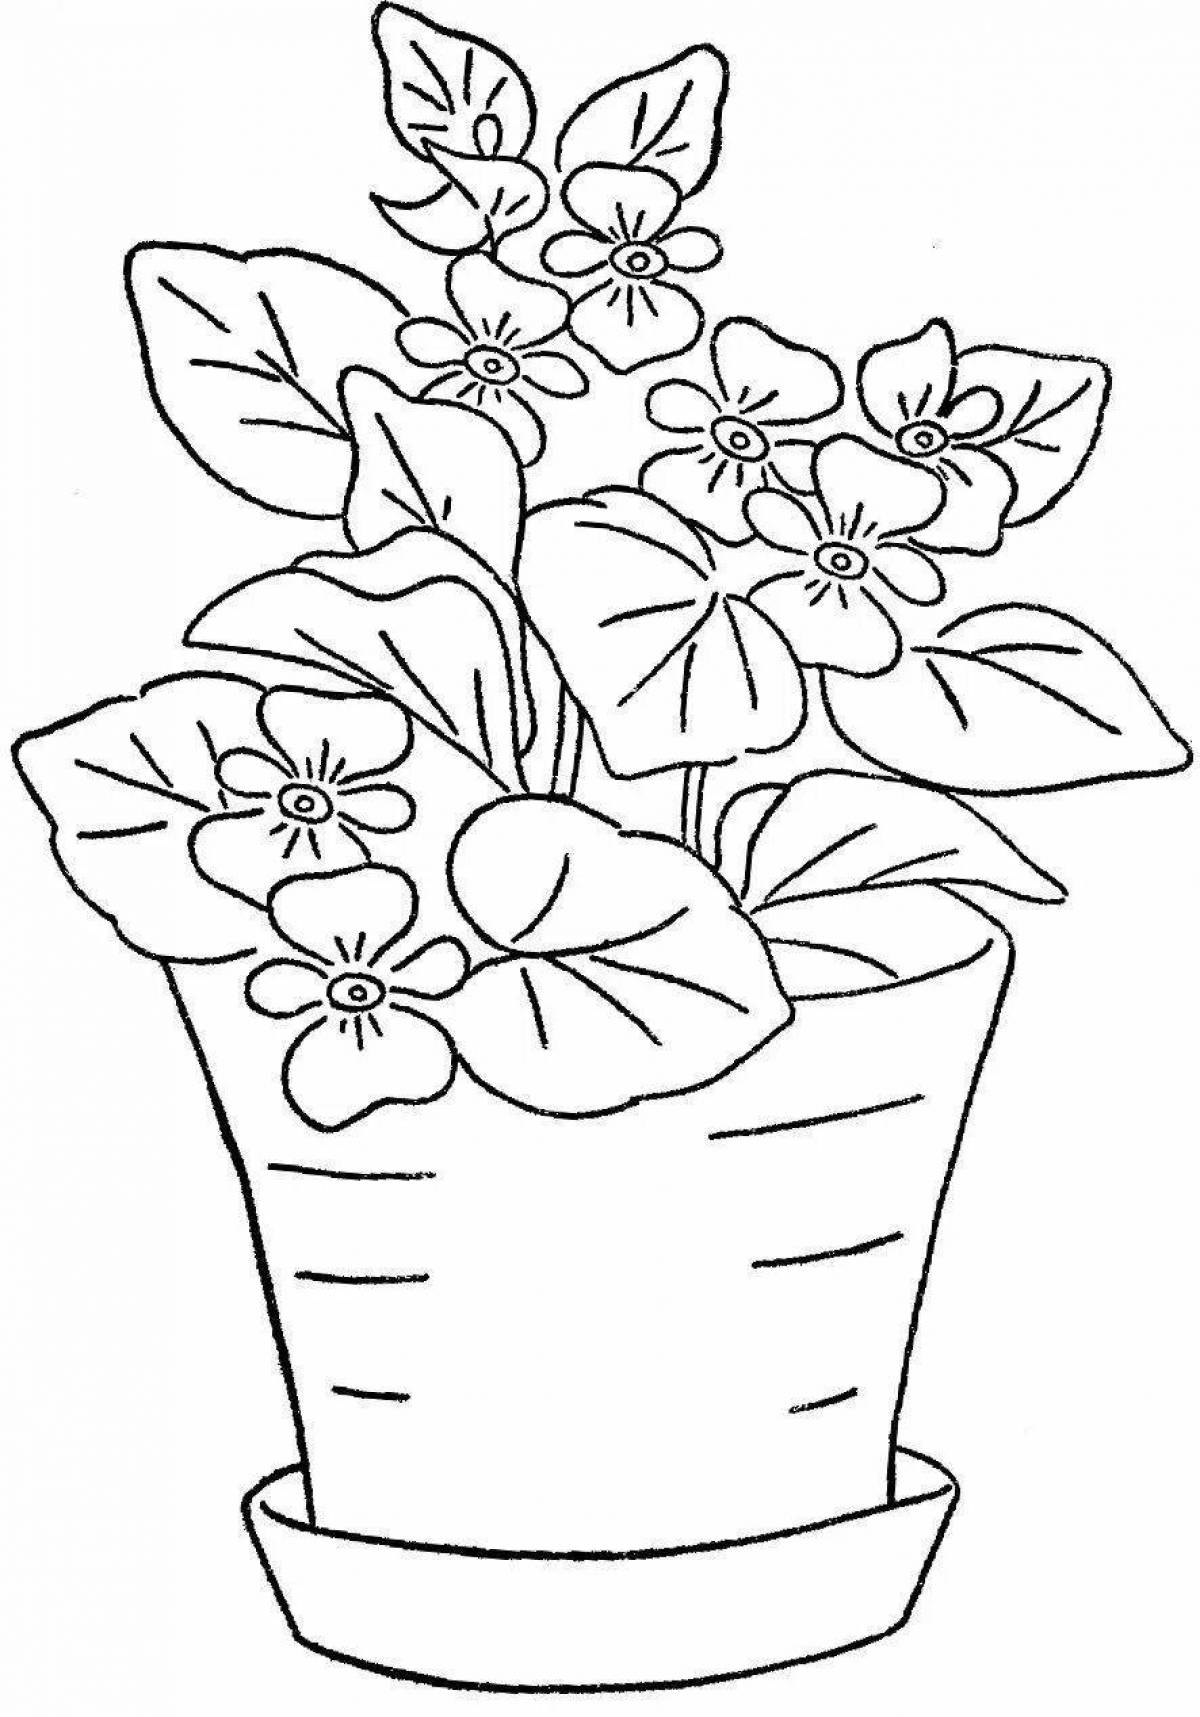 Coloring page lovely purple flower